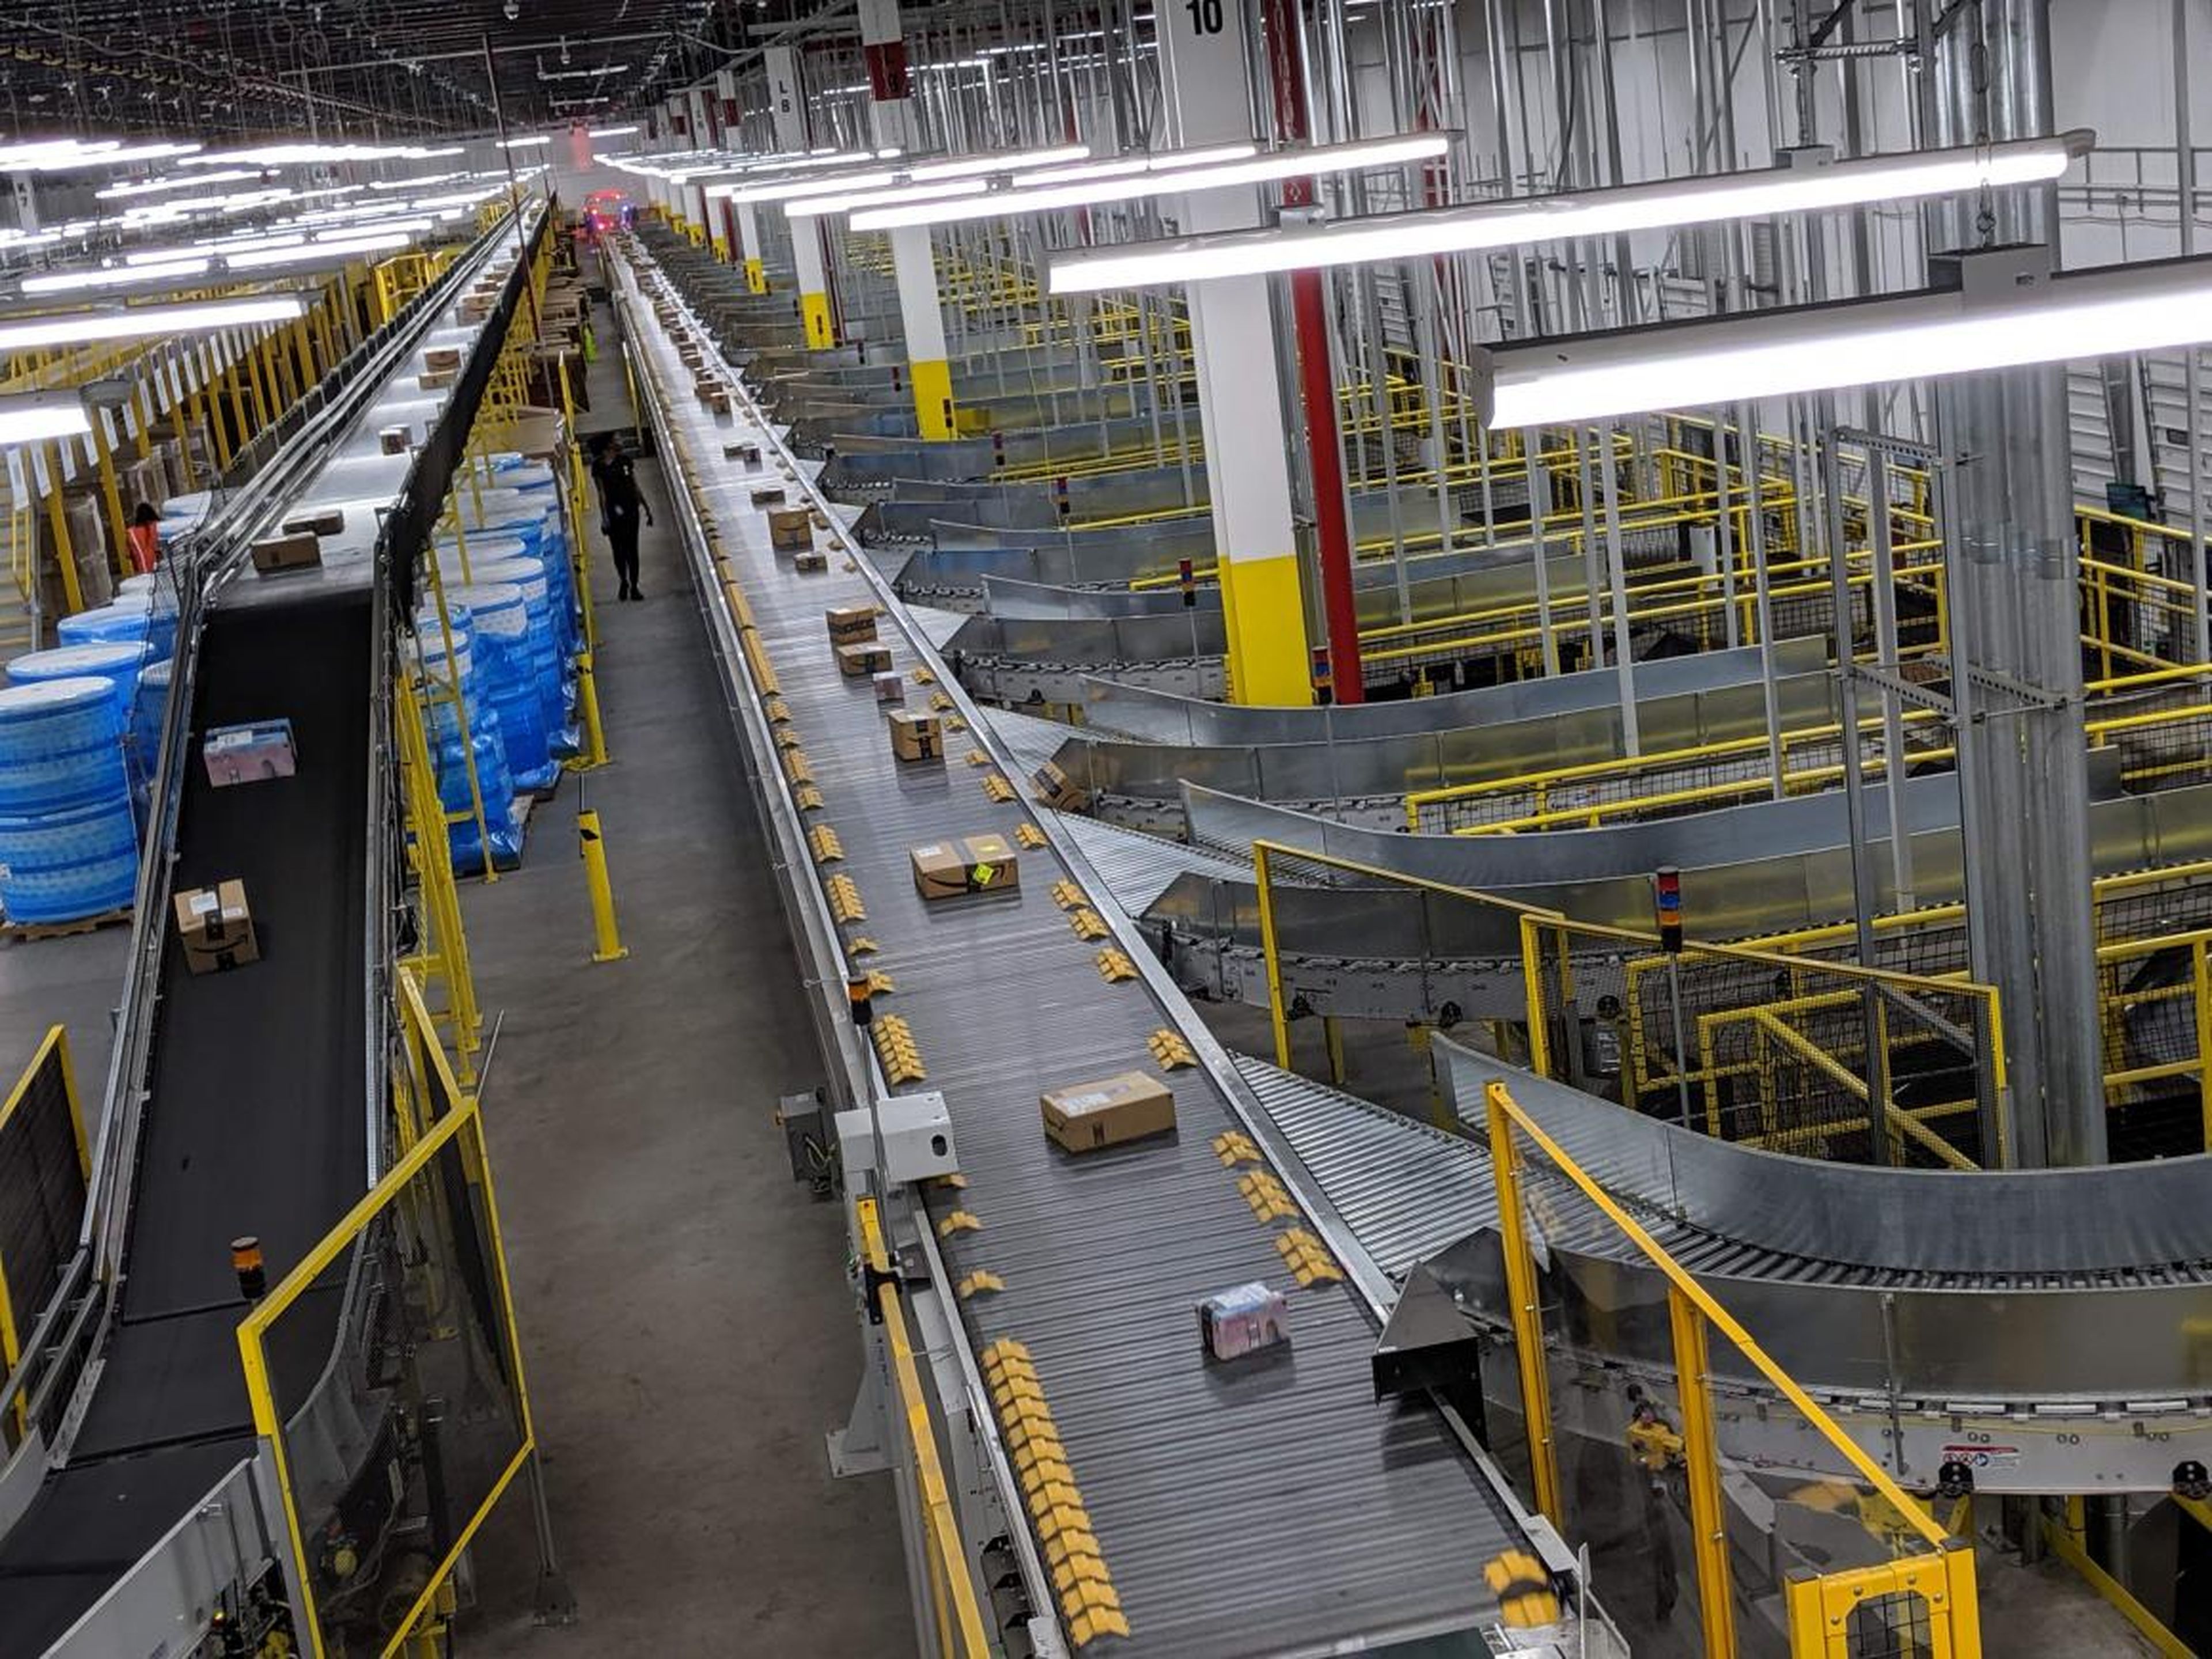 The shipping area seen here was one of the most immediately impressive parts of the facility. Packages are automatically whisked from the conveyor belt to different chutes solely by the metal slats moving from left to right (the